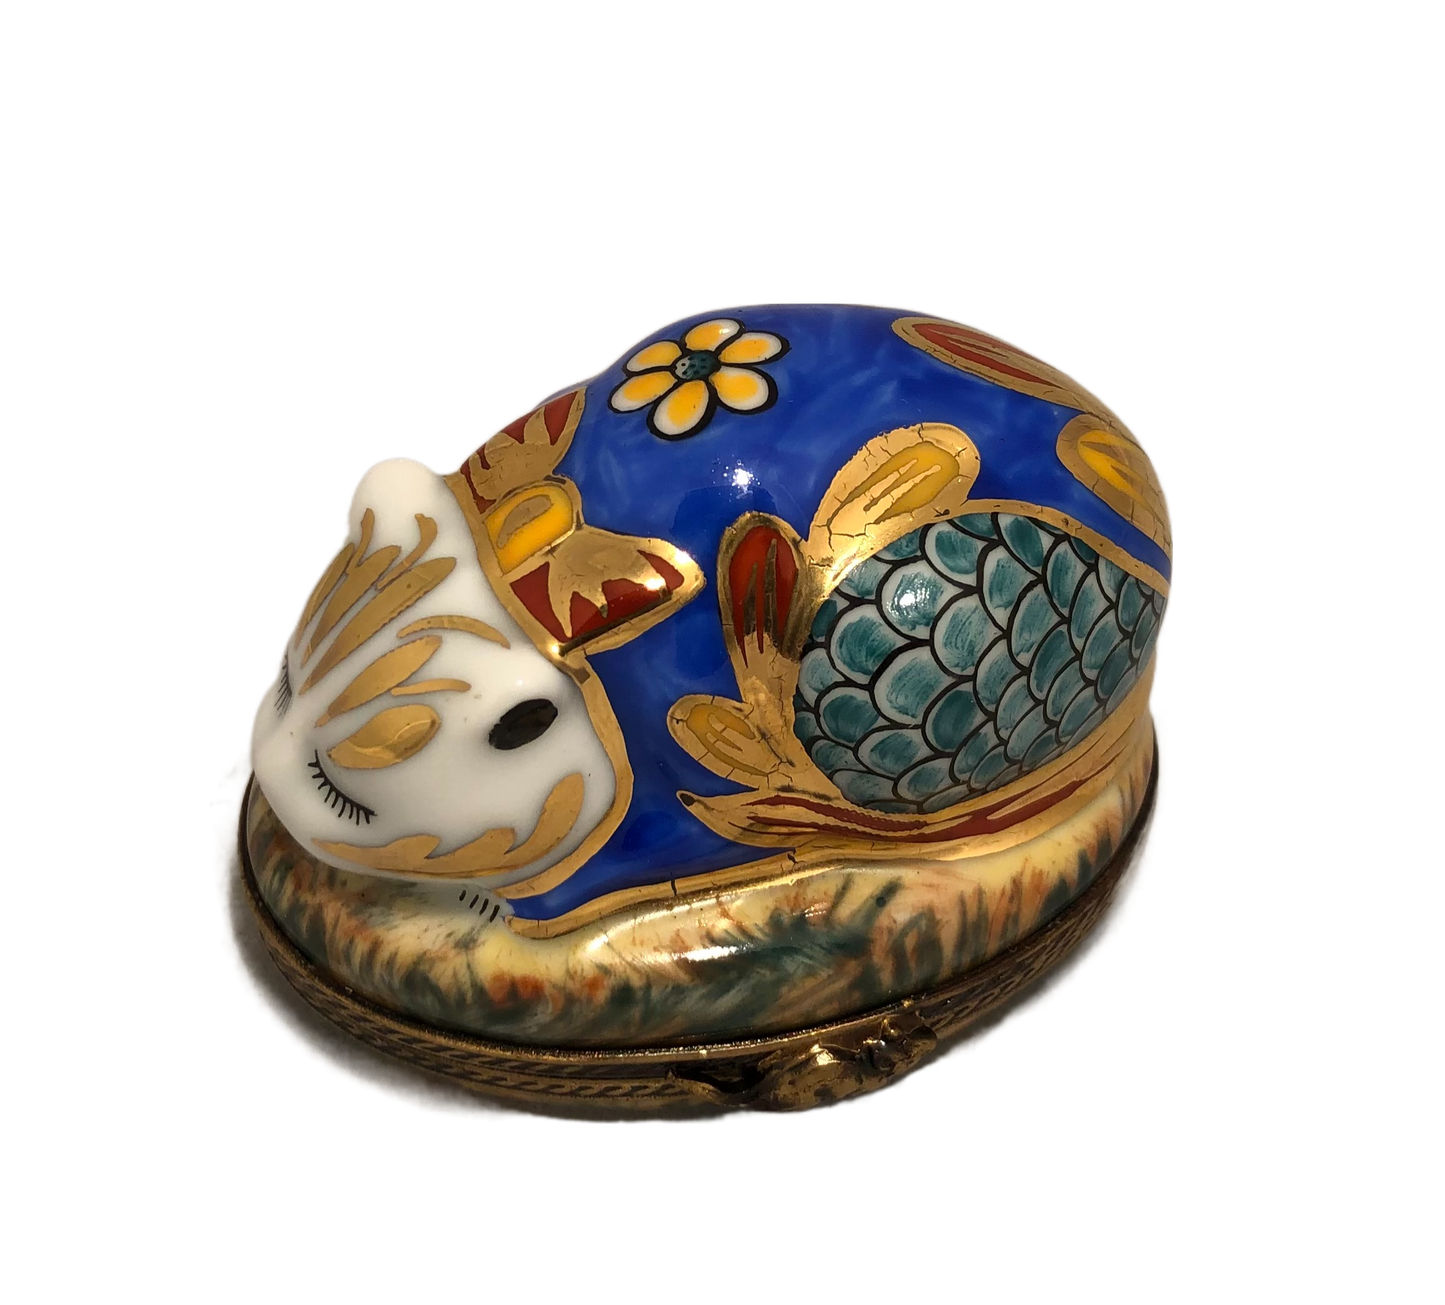 Regal Feline Elegance: Hand-Painted Limoges Box - Resting White Cat with Blue Shell and Golden Accents